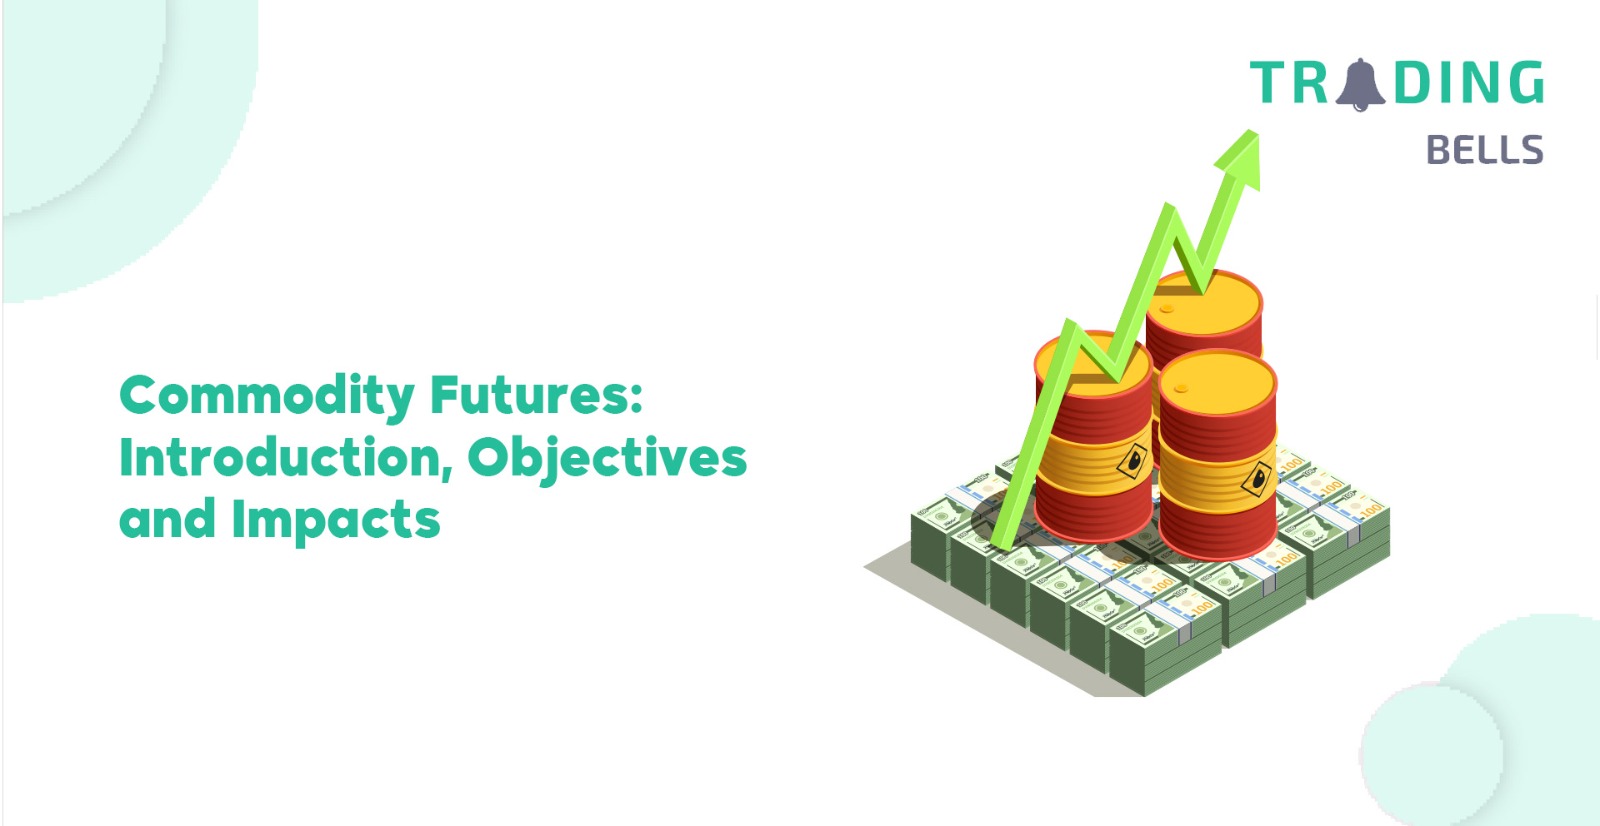 Commodity Futures Introduction, Objectives and Impacts